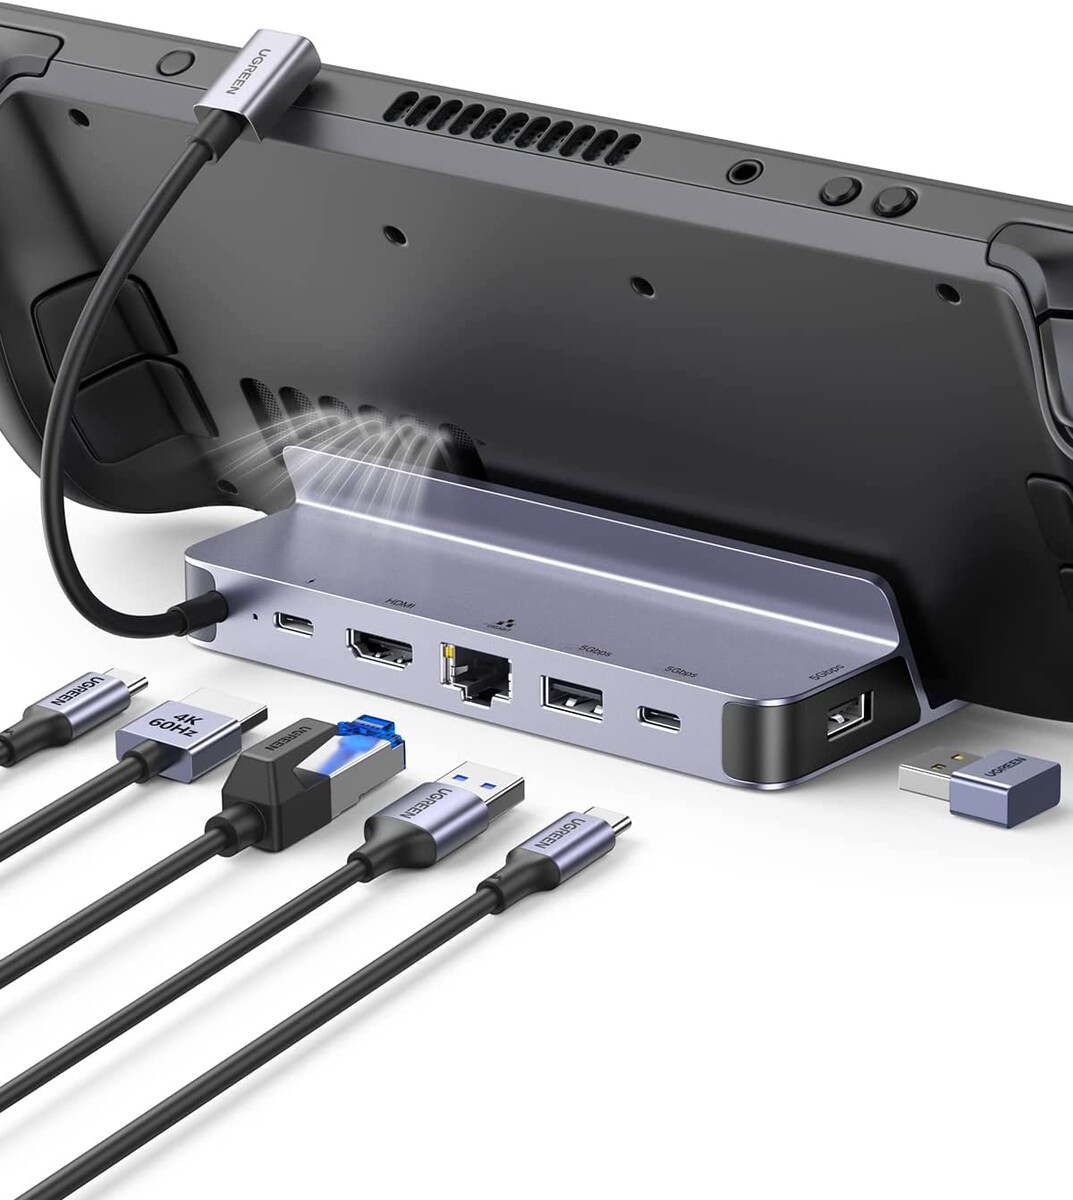 JSAUX 7-in-1 Docking Station with on-board cable holder goes for US$69 off  -  News